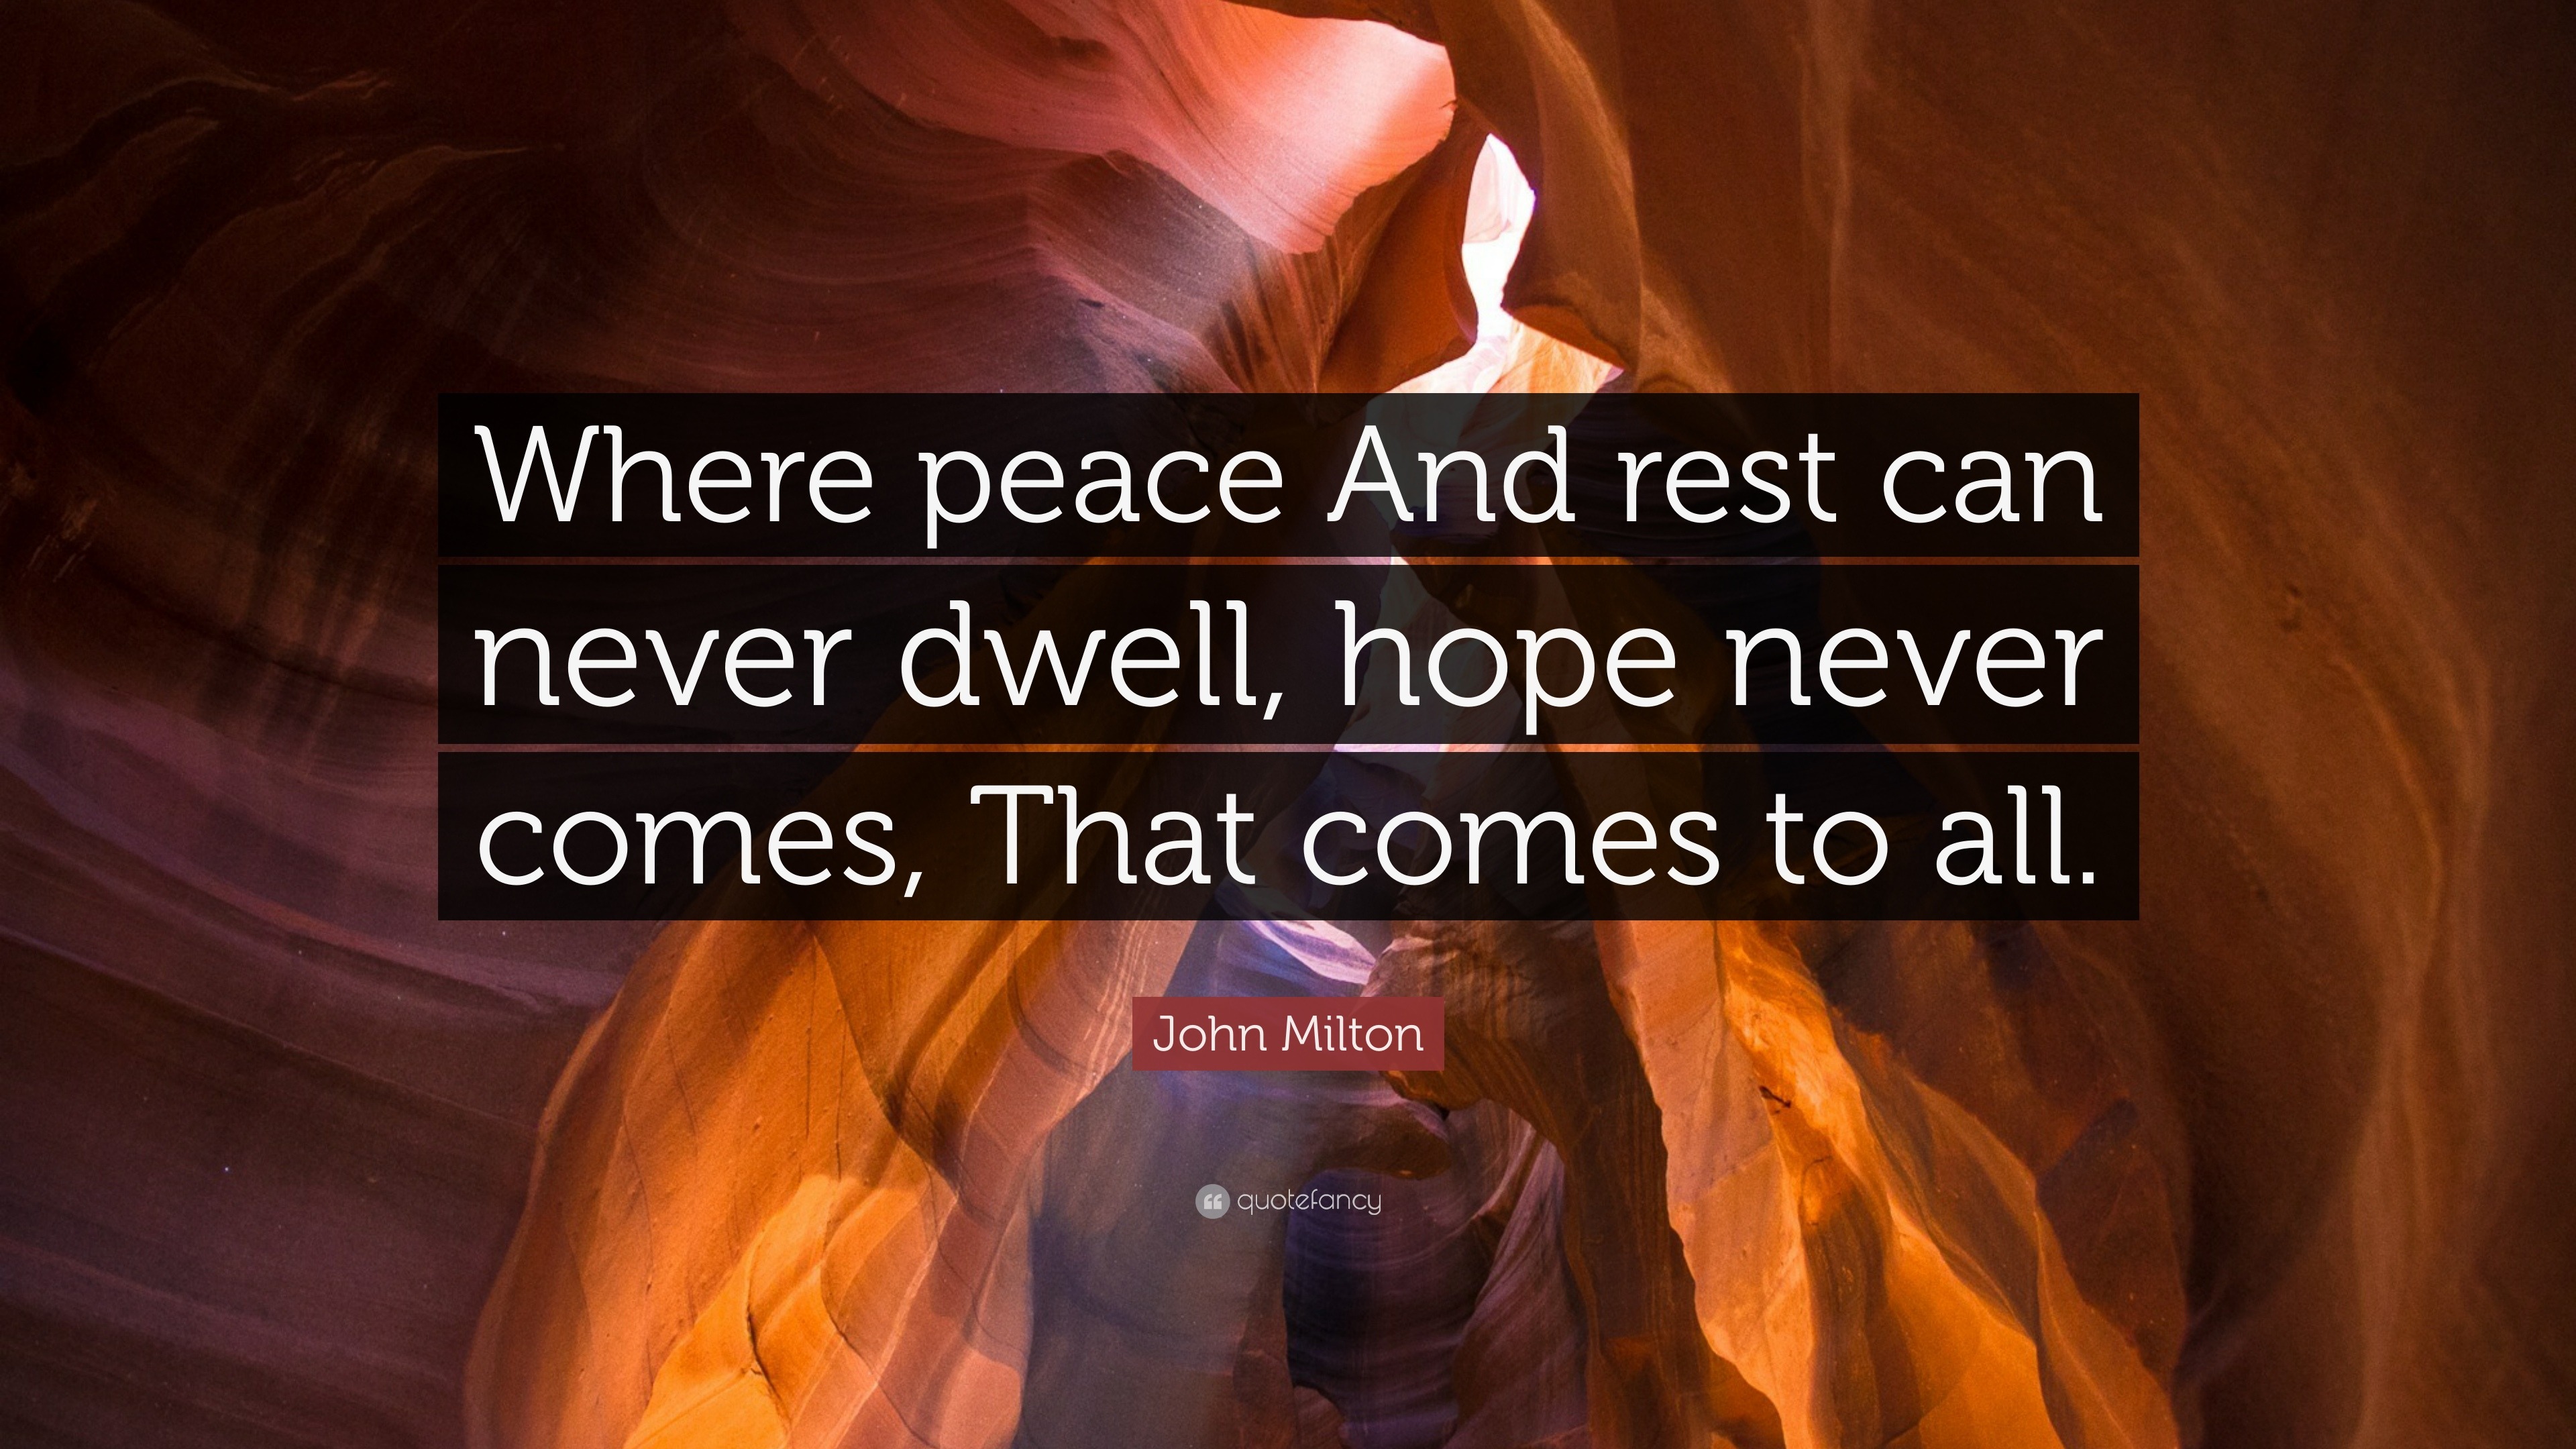 John Milton Quote: “Where peace And rest can never dwell, hope never ...